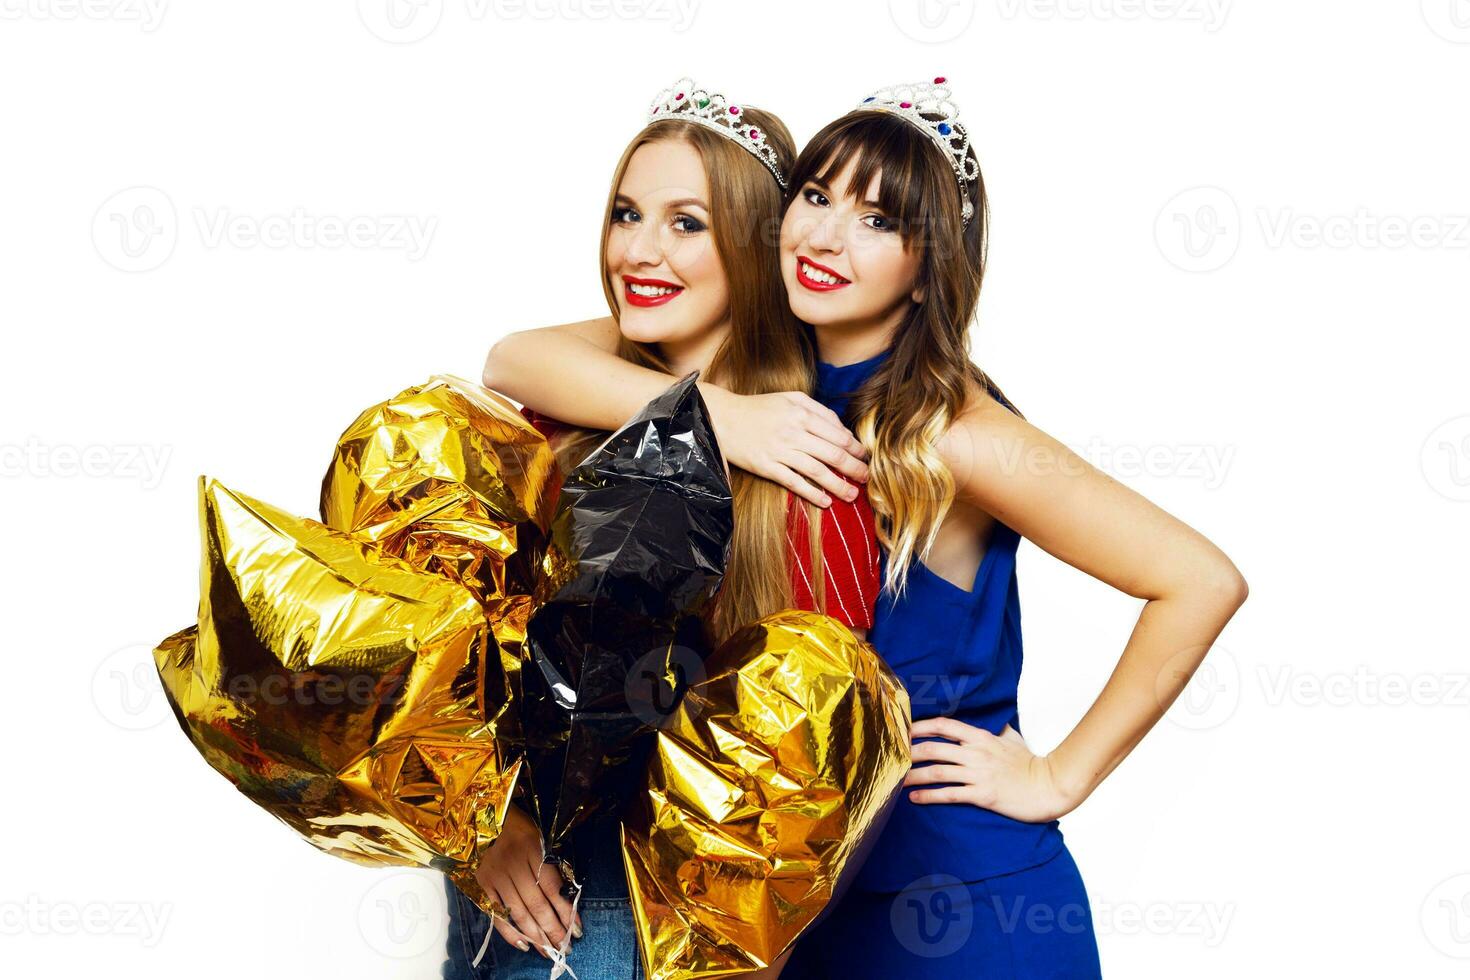 Indoor lifestyle positive portrait of two pretty women, best friends  with bright party balloons, masquerade crowns  posing  on white background. photo